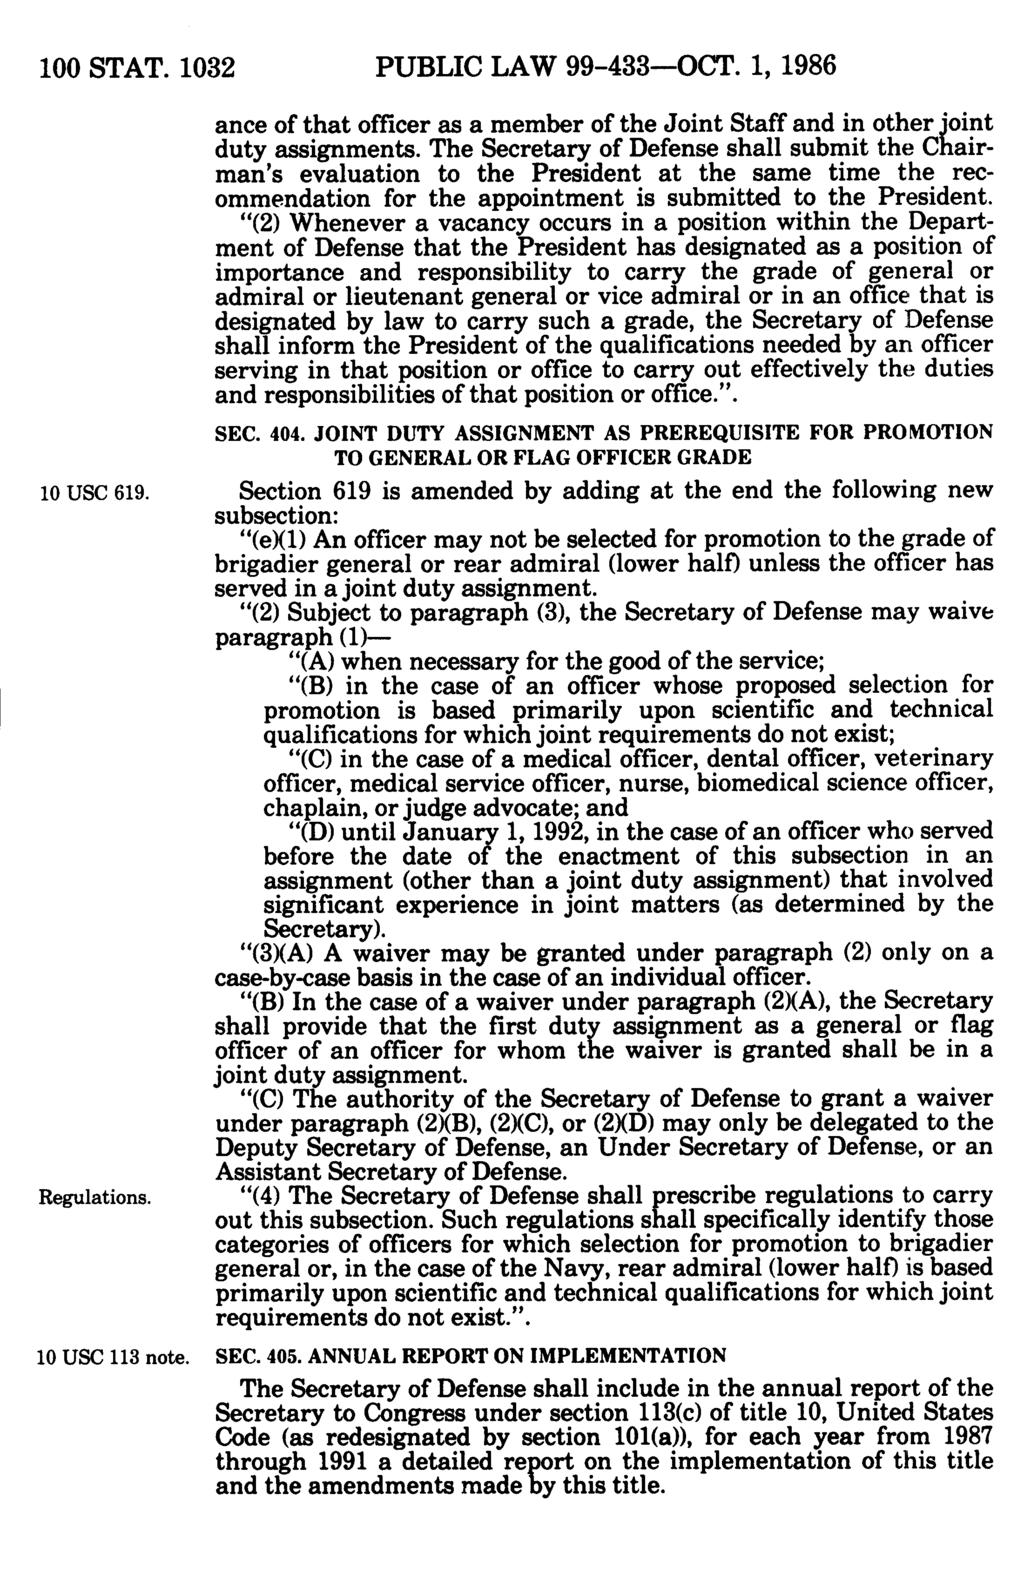 100 STAT. 1032 PUBLIC LAW 99-433-OCT. 1986 1, 10 USC 619. Regulations. 10 USC 113 note. ance of that officer as a member of the Joint Staff and in other joint duty assignments.